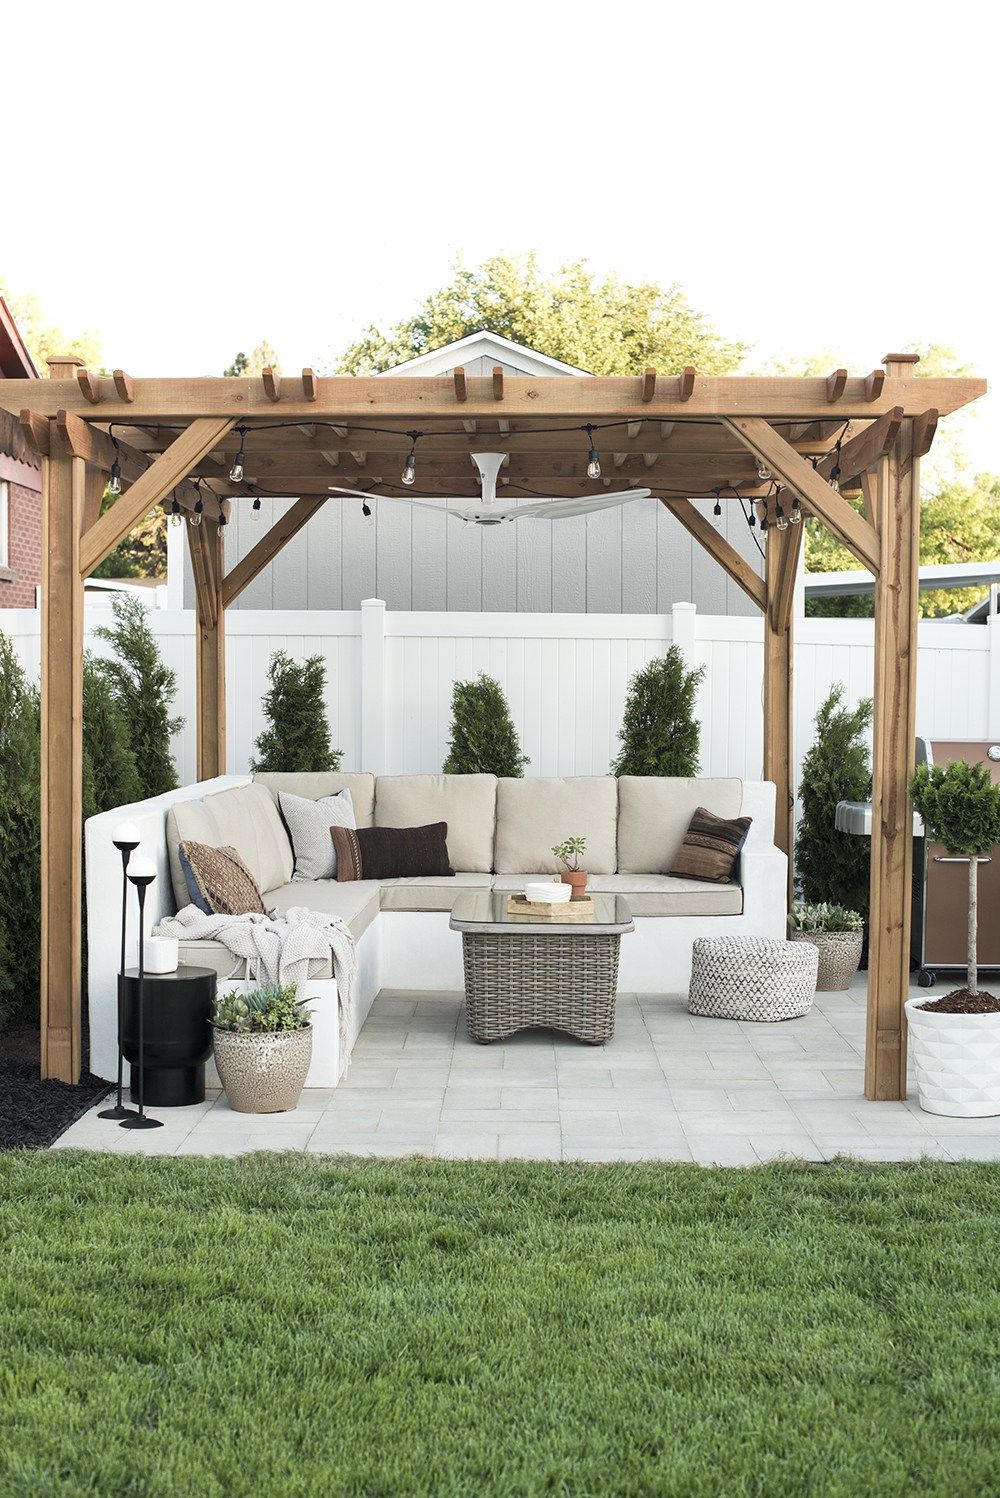 16 Best Pergola Ideas For The Backyard How To Use A Pergola,Work From Home Call Center